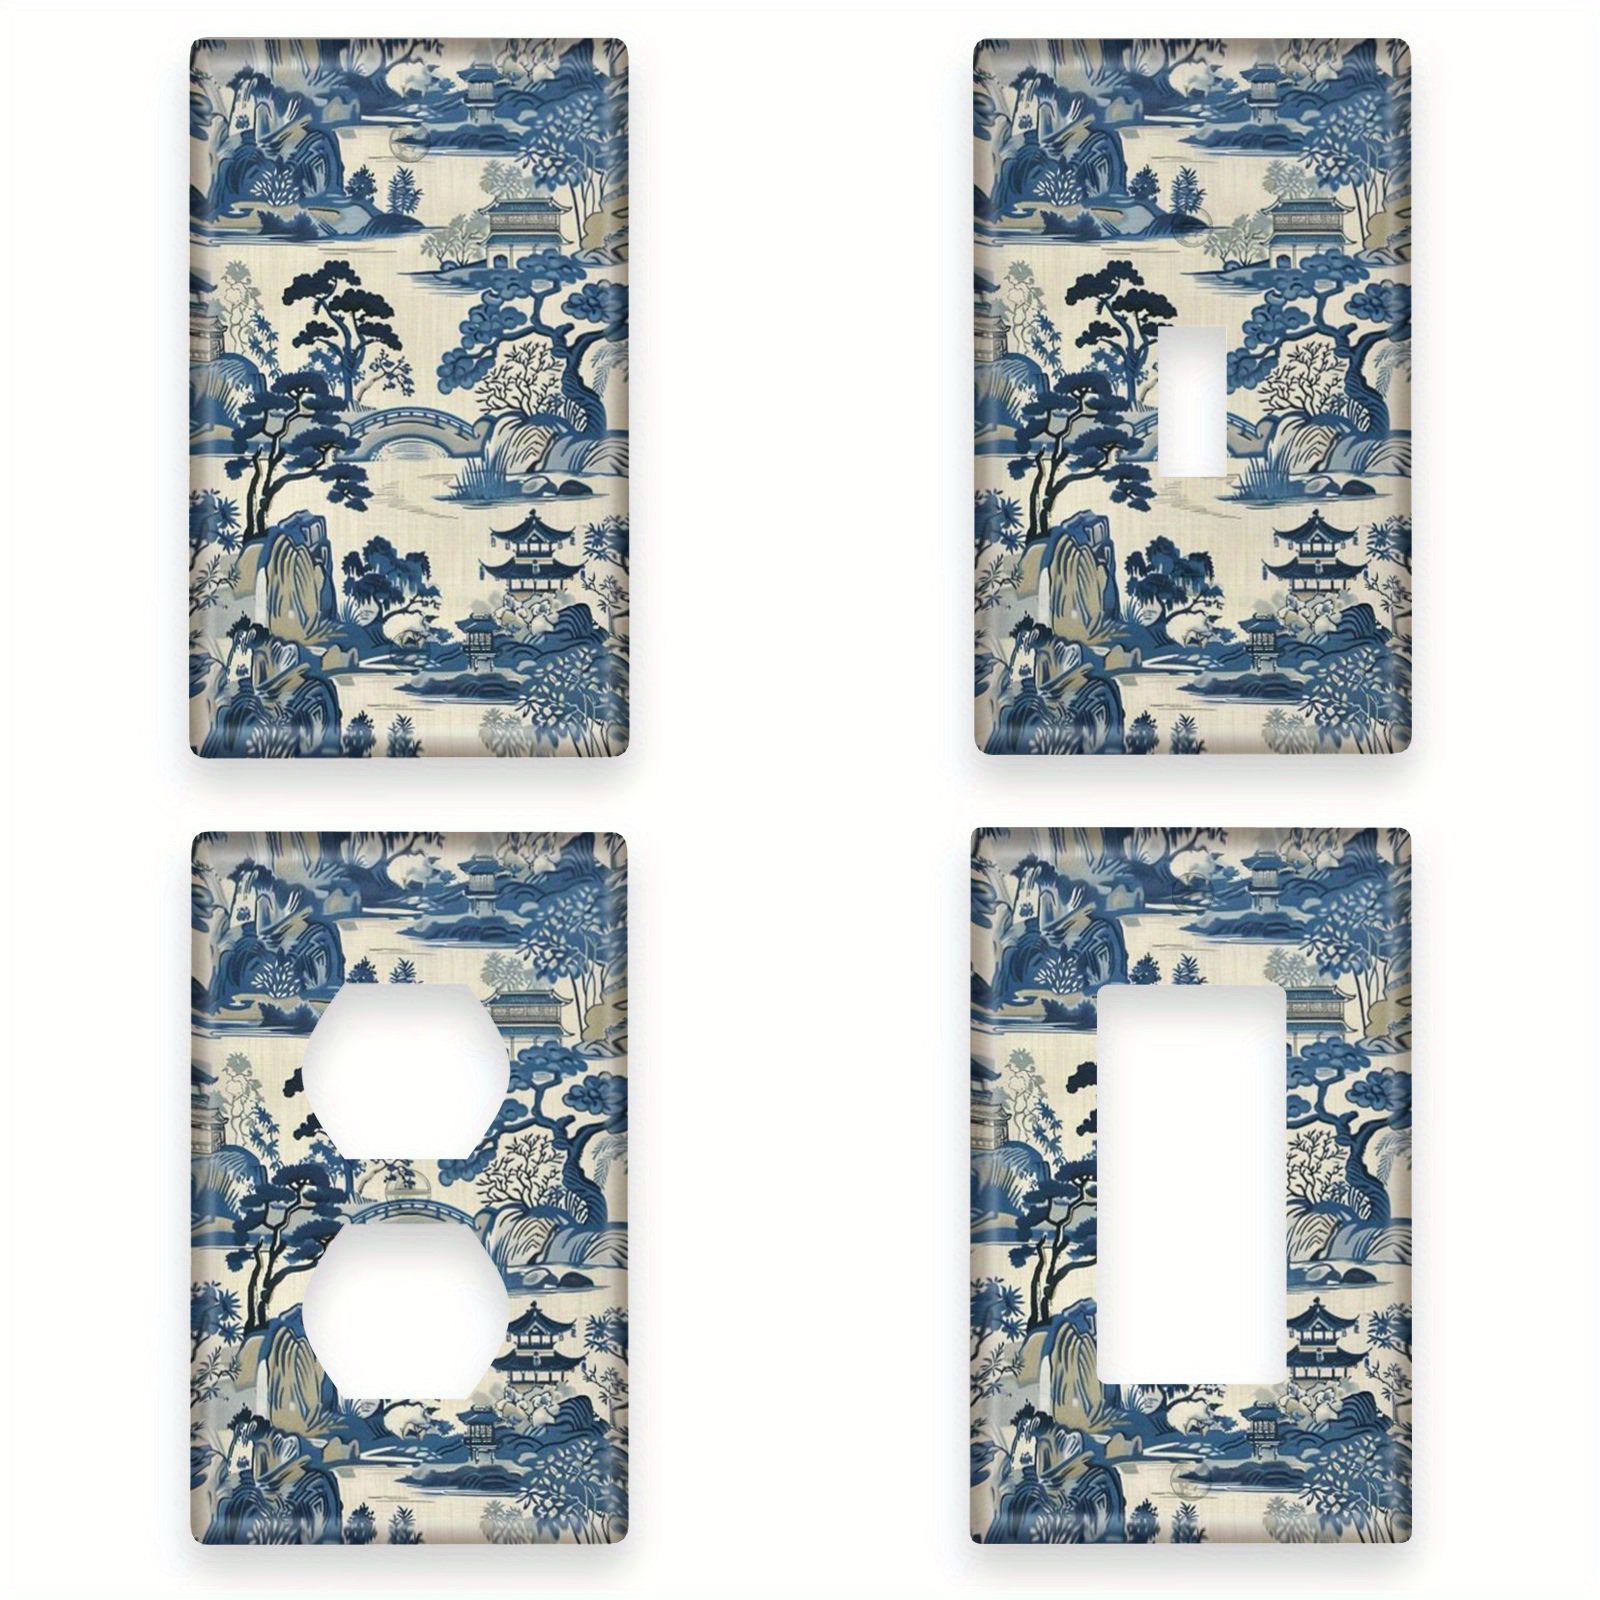 

Chinoiserie Vintage Style Mountain Fall Decorative Light Switch Plate Cover - Rocker/duplex/single Toggle/blank Wall Plate - No Electricity Or Battery Needed - Easy To Install And Clean